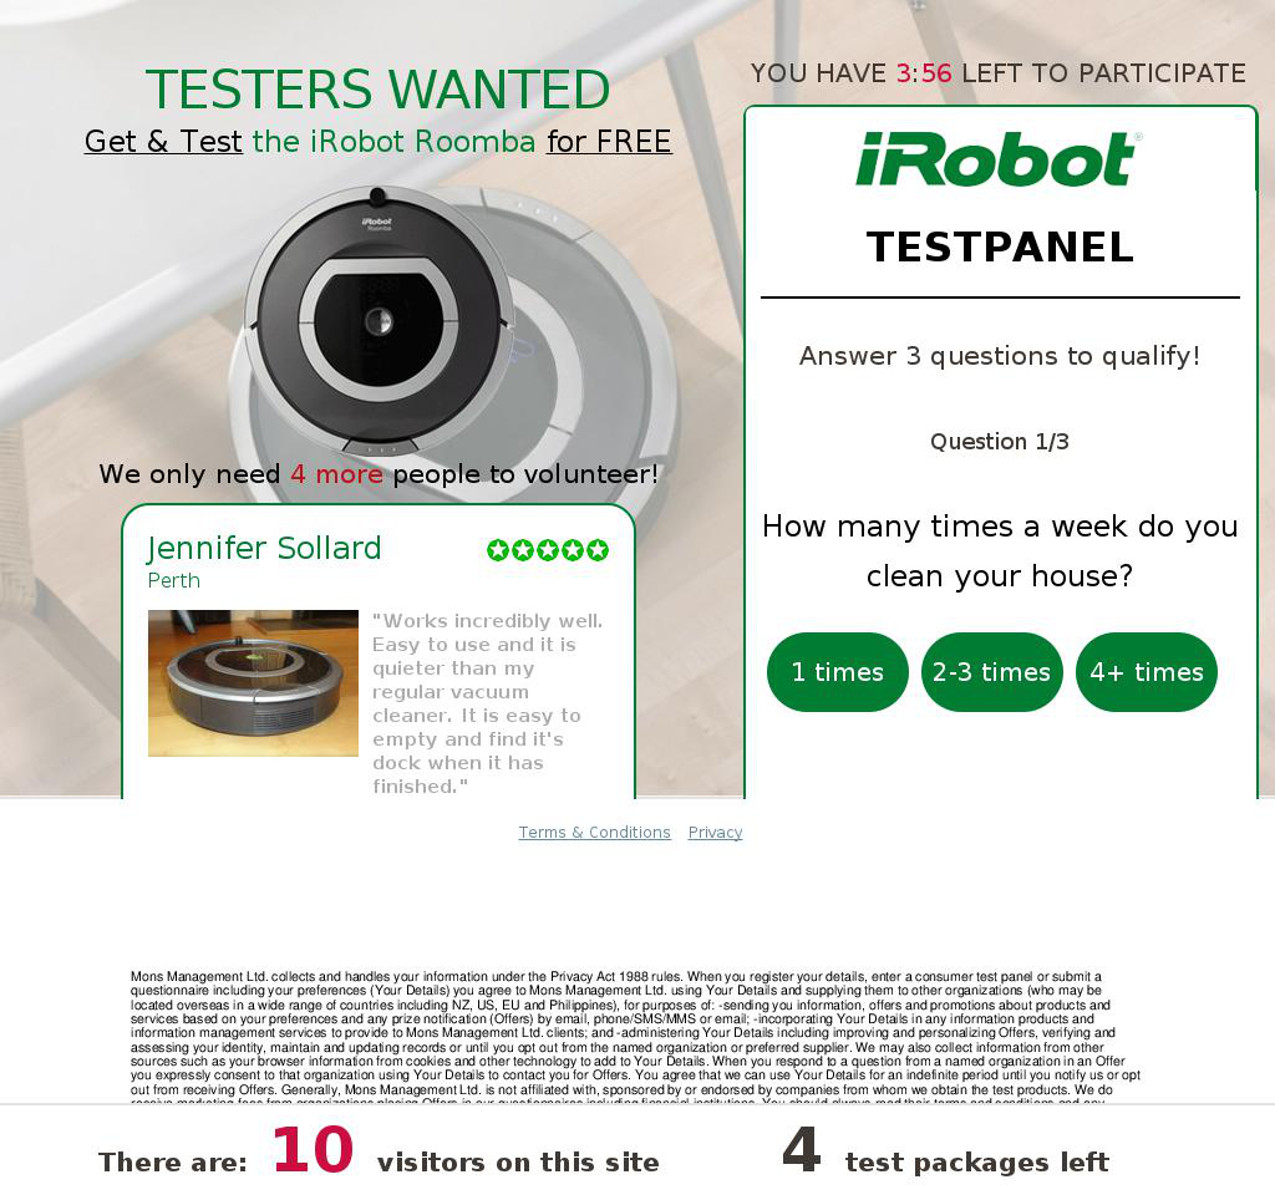 MailShark Get A Cleaning Robot For Your Opinion Visit Scam Site